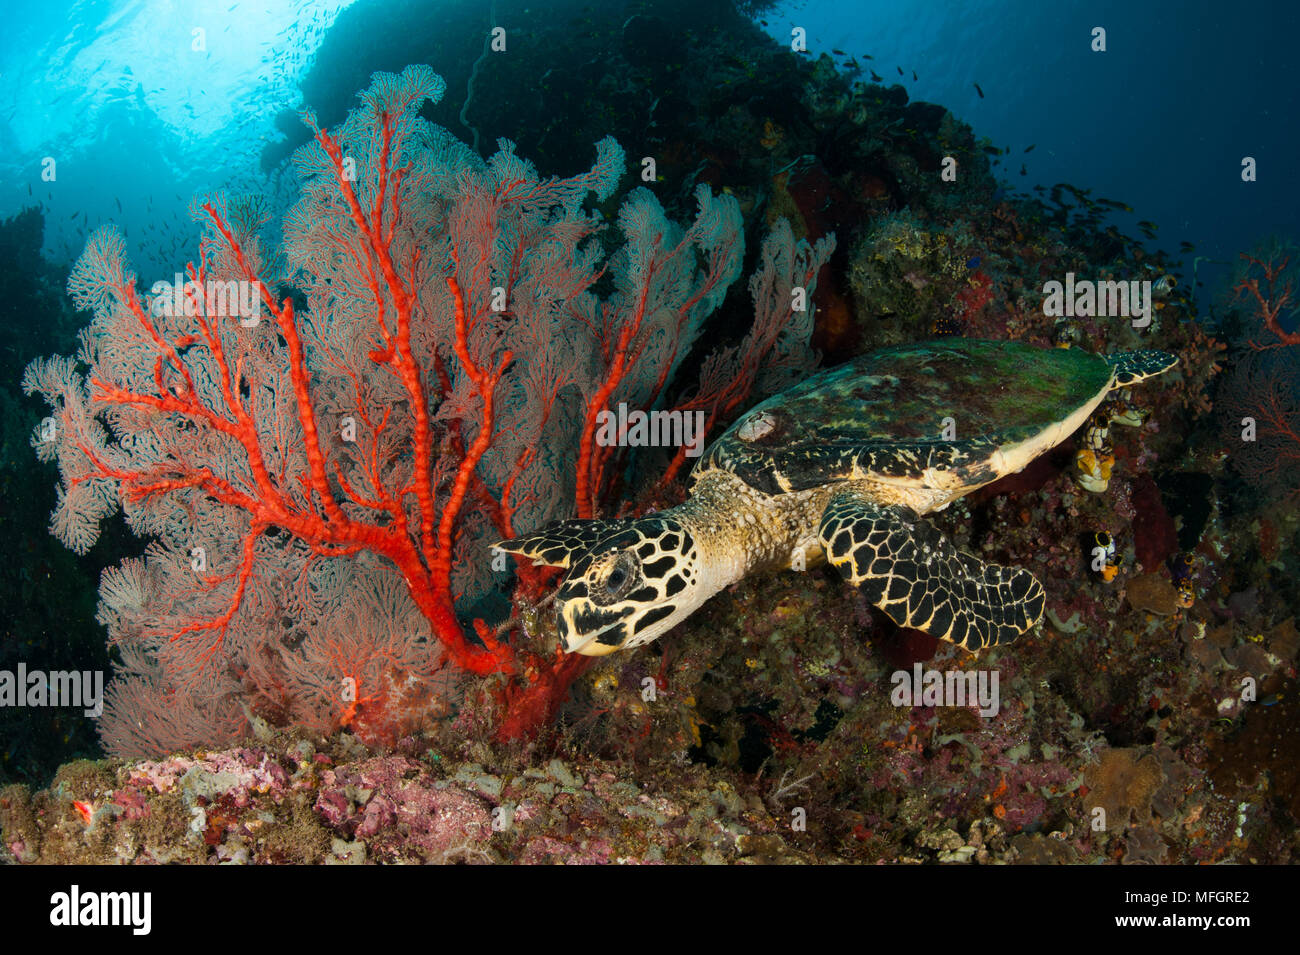 Close up view of a Hawksbill turtle next to a red sea fan on a reef in Raja Ampat, West Papua, Indonesia Stock Photo